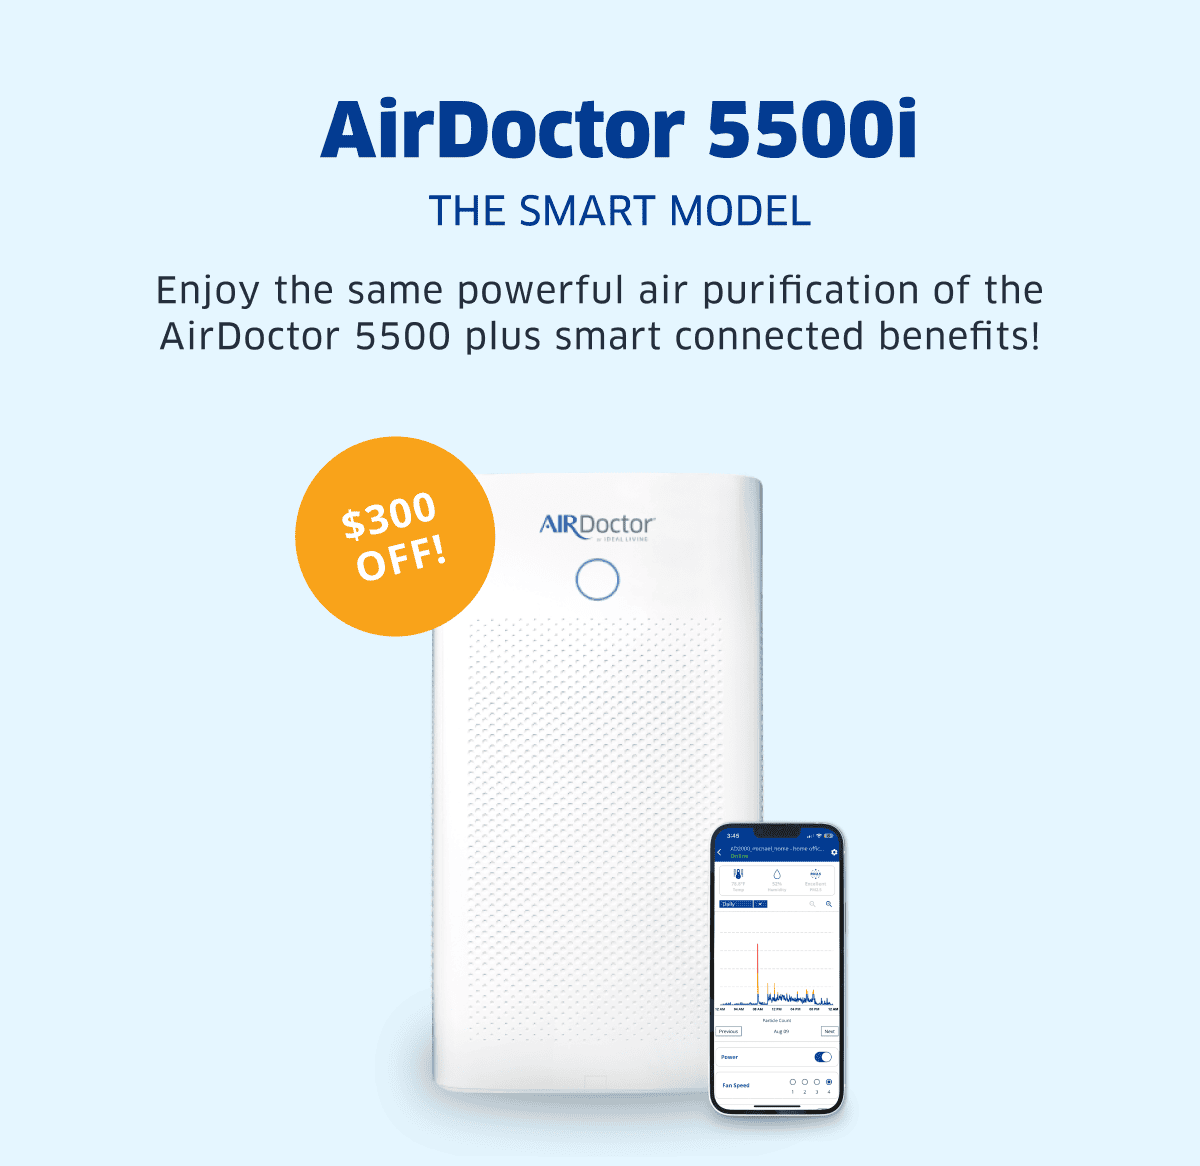 AirDoctor 5500i The Smart Model